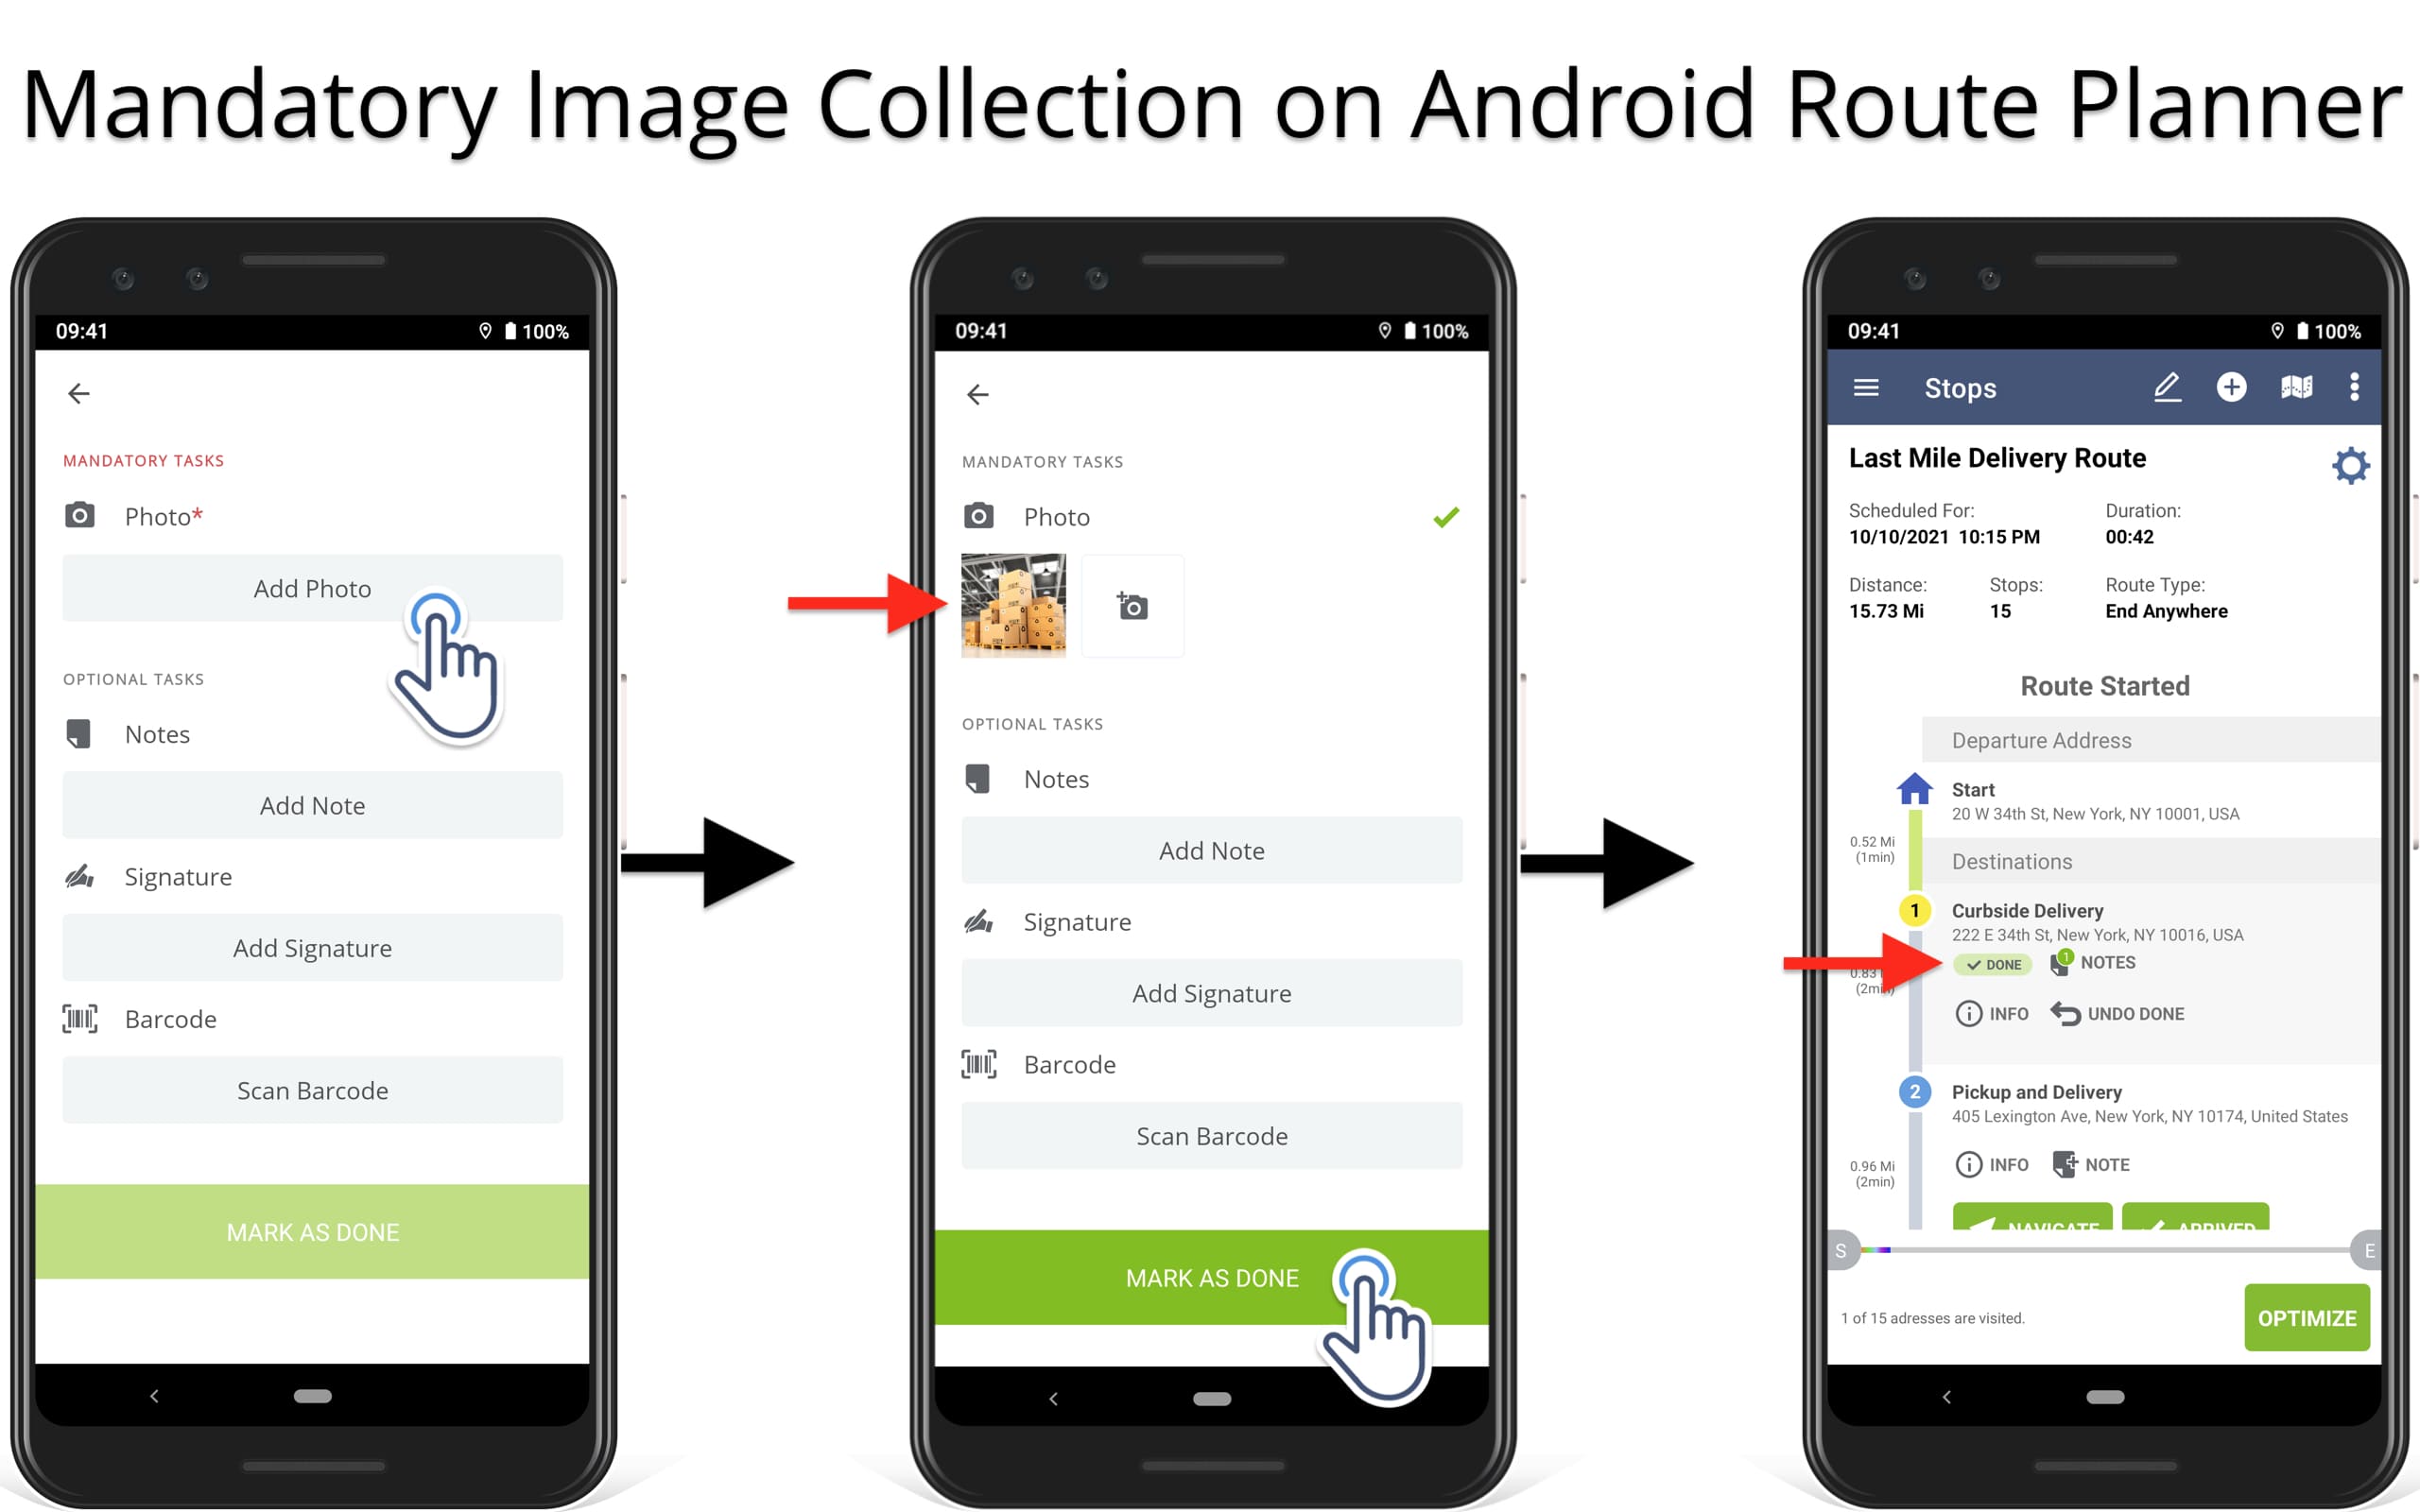 Attach mandatory images to route stops as proof of delivery using the Android Route Planner app.